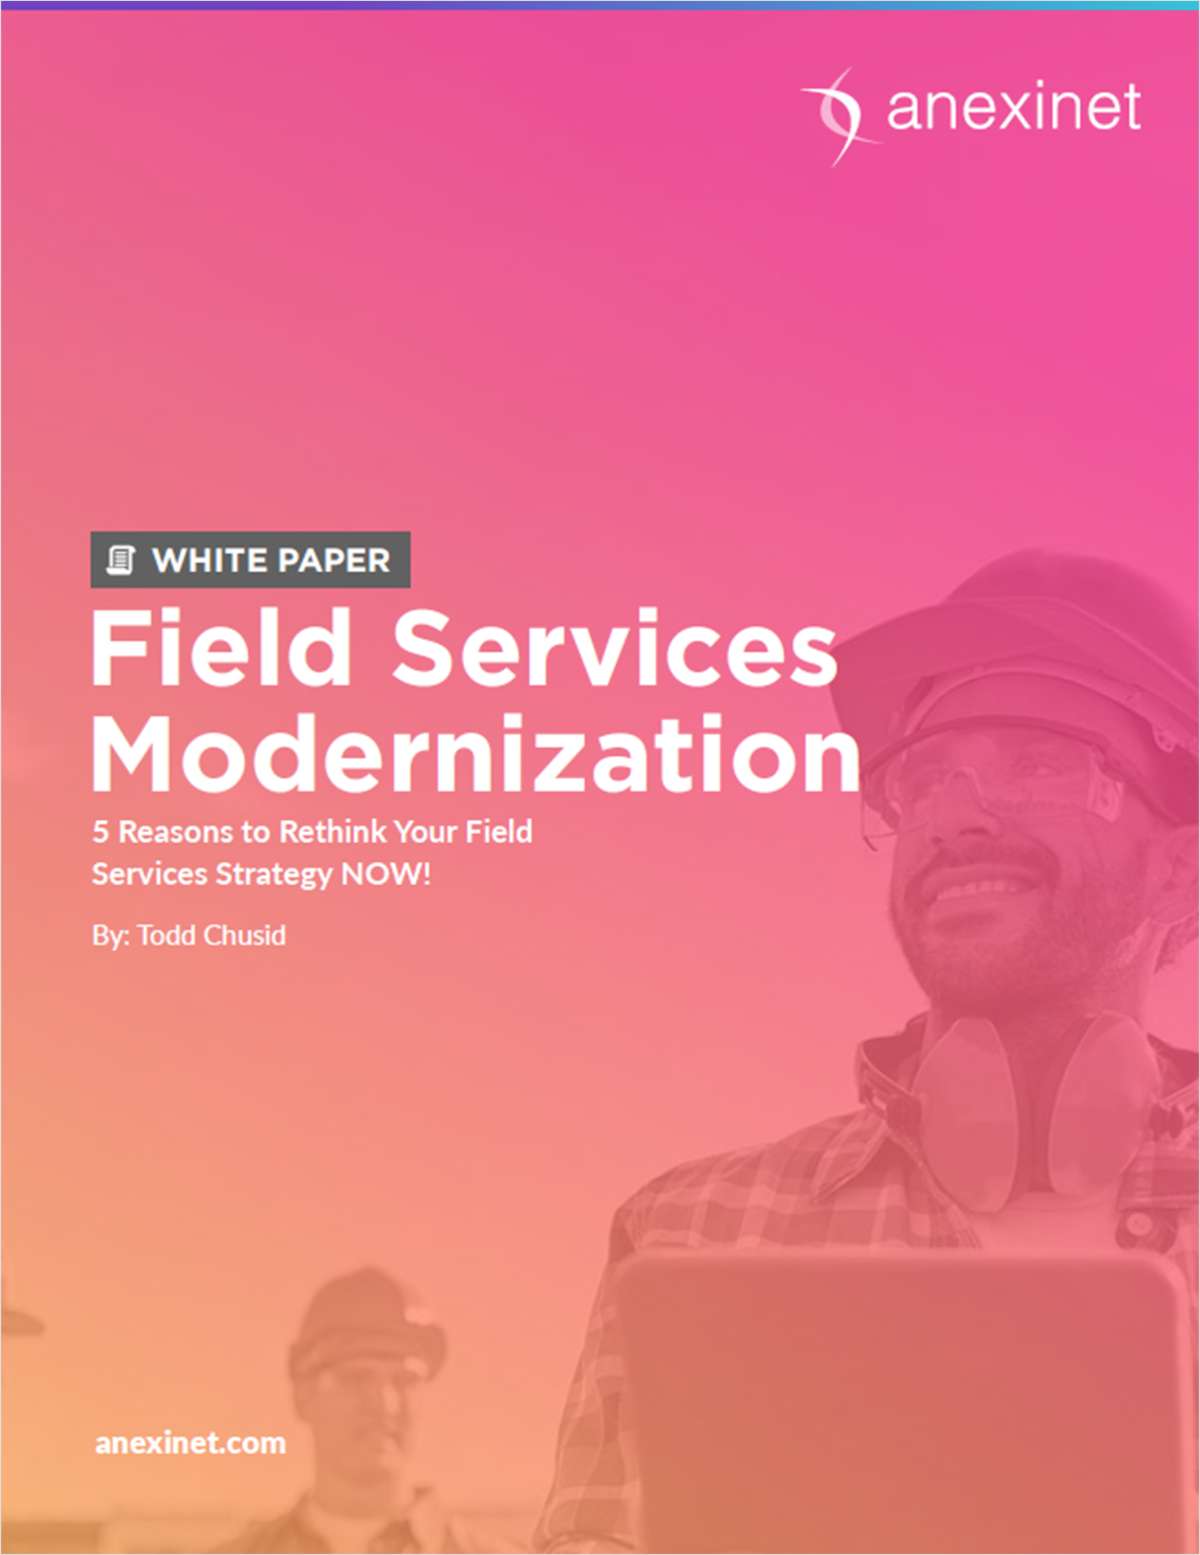 5 Reasons to Rethink Your Field Services Strategy Now